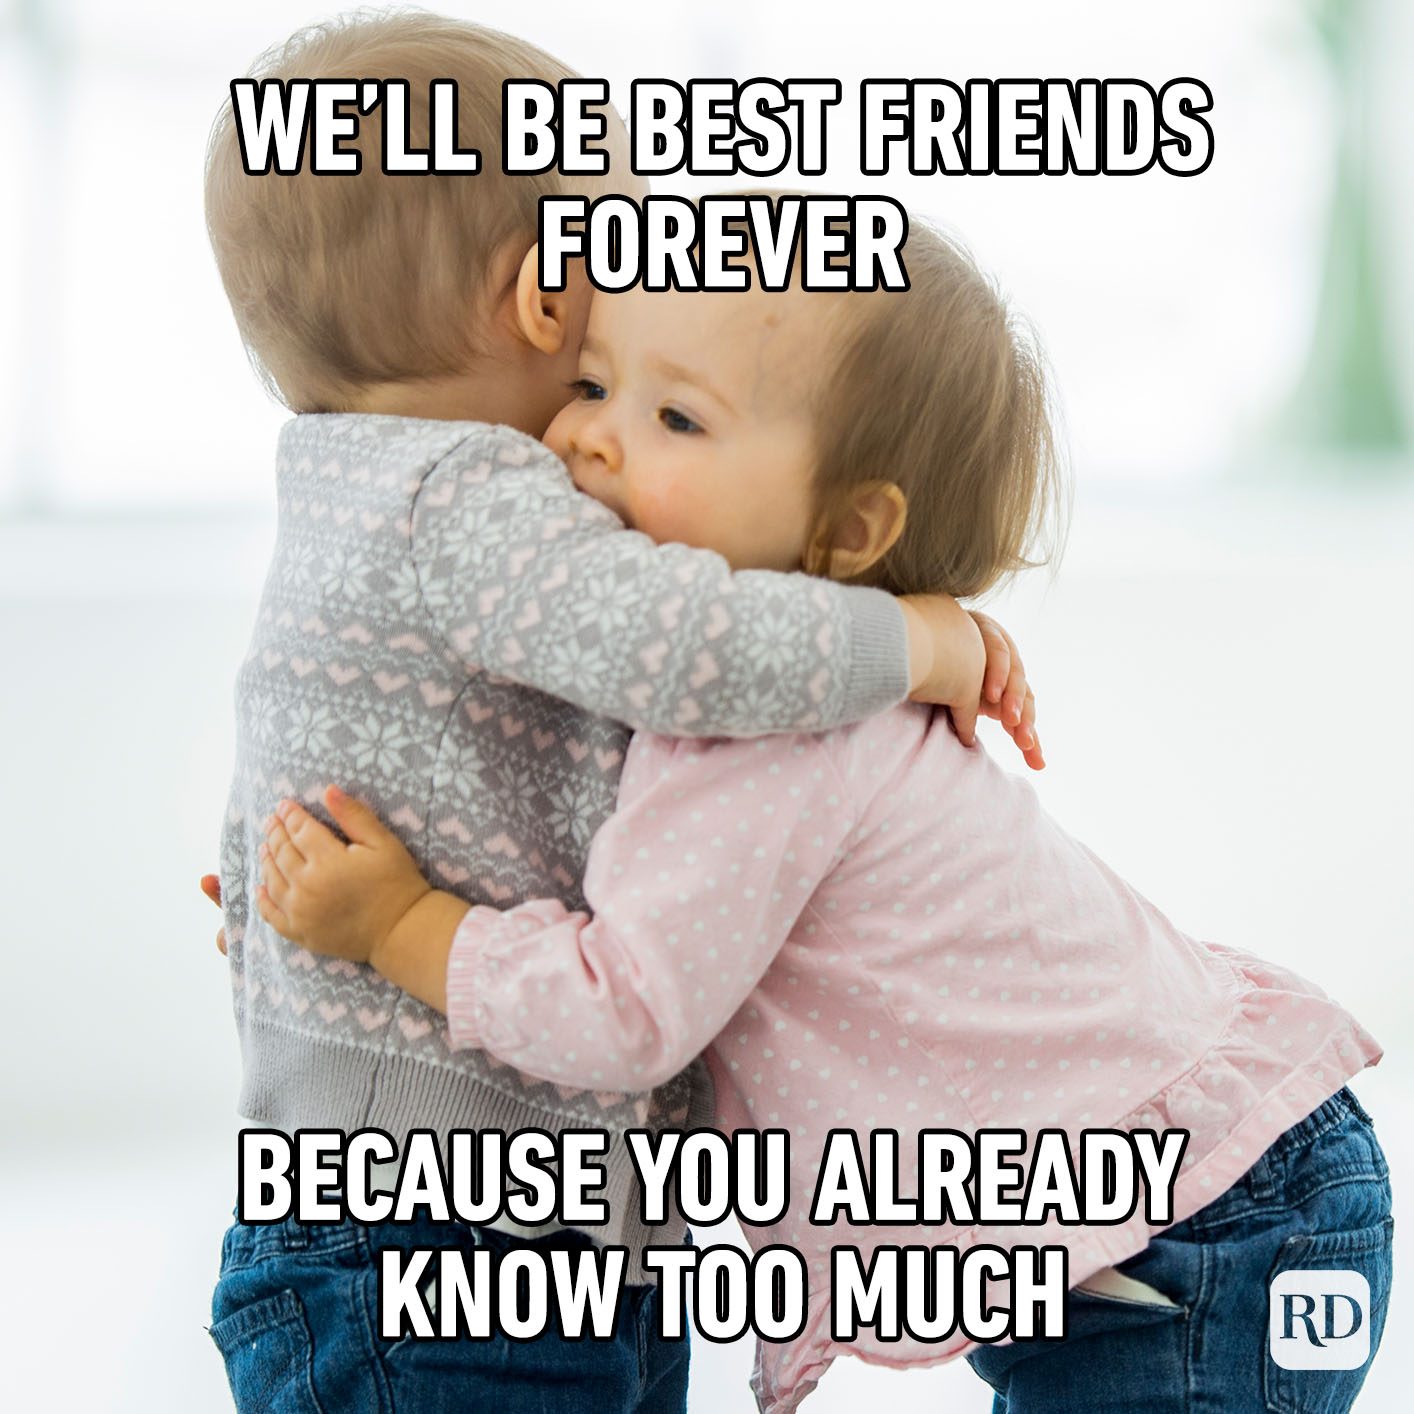 25 Funny Friend Memes to Send to Your Bestie | Reader's Digest